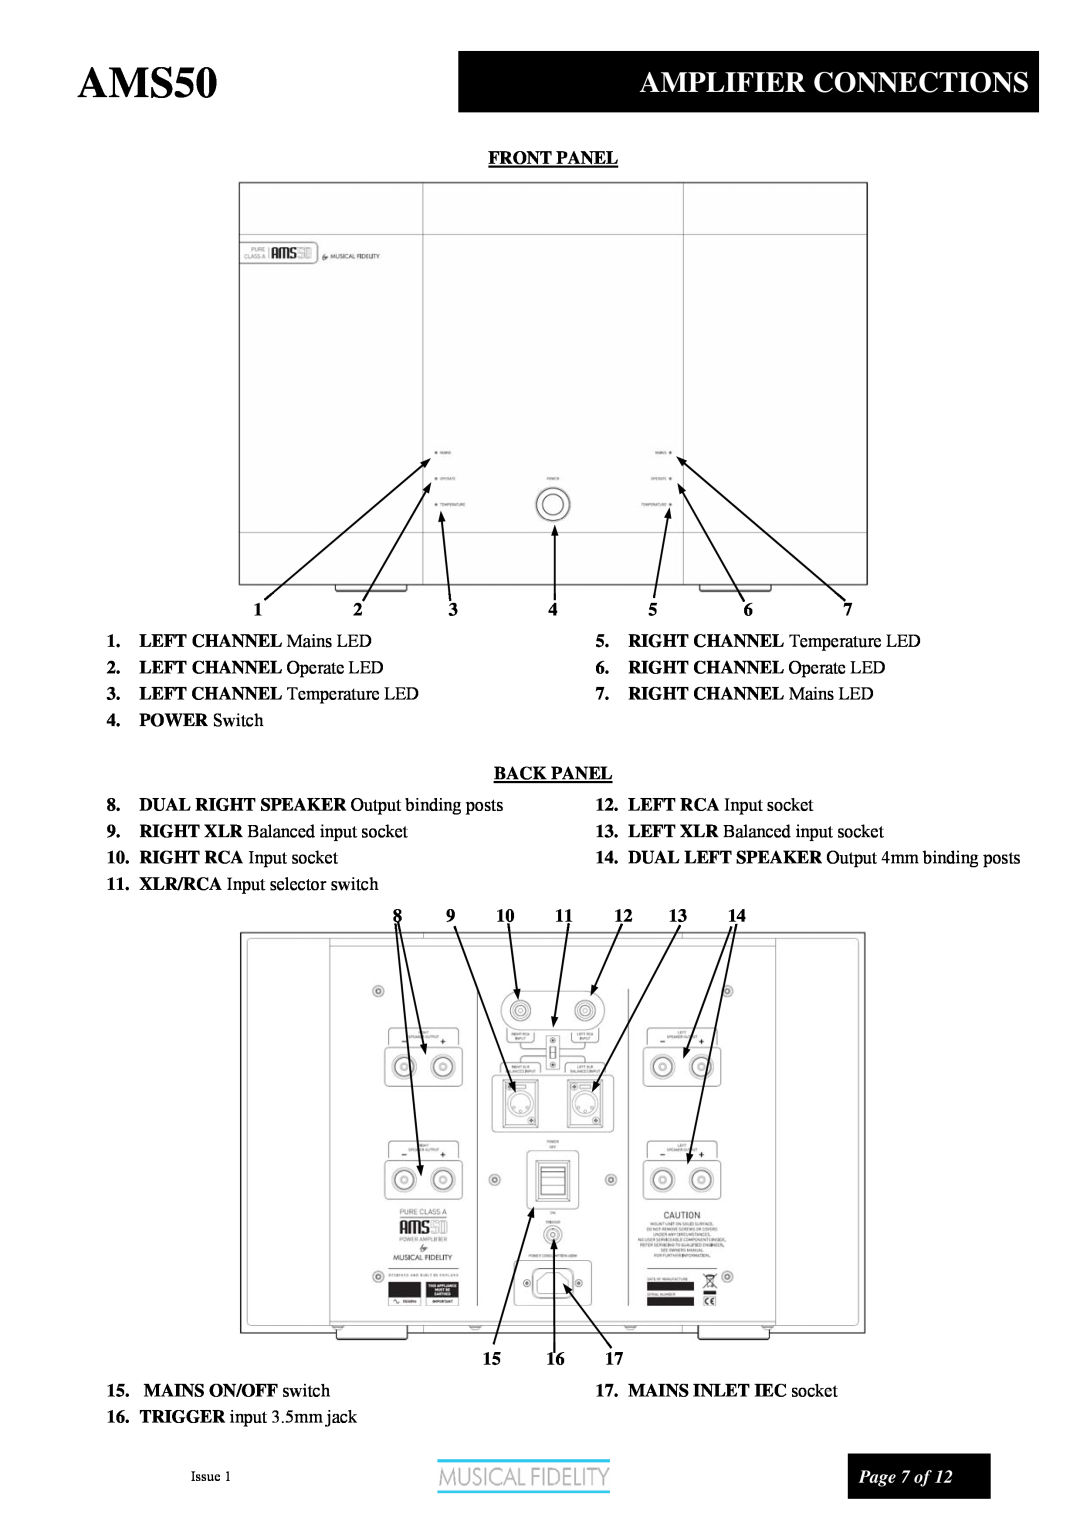 Musical Fidelity AMS50 manual Amplifier Connections, Page 7 of 